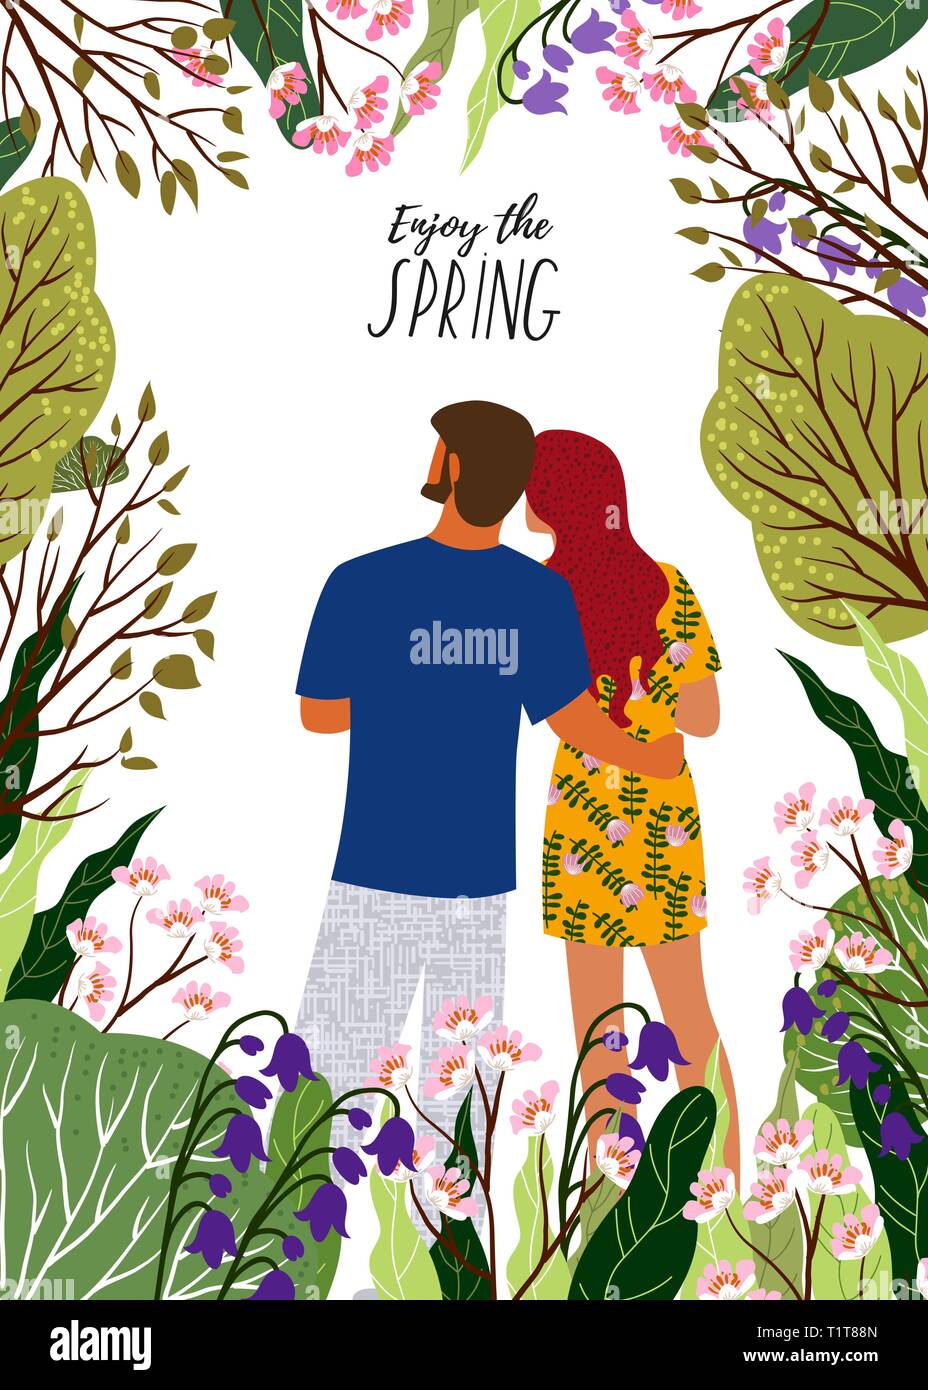 Enjoy the spring. Young couple, flowers, trees in a trendy flat cute style on a white background. Vertical Vector illustration Stock Vector